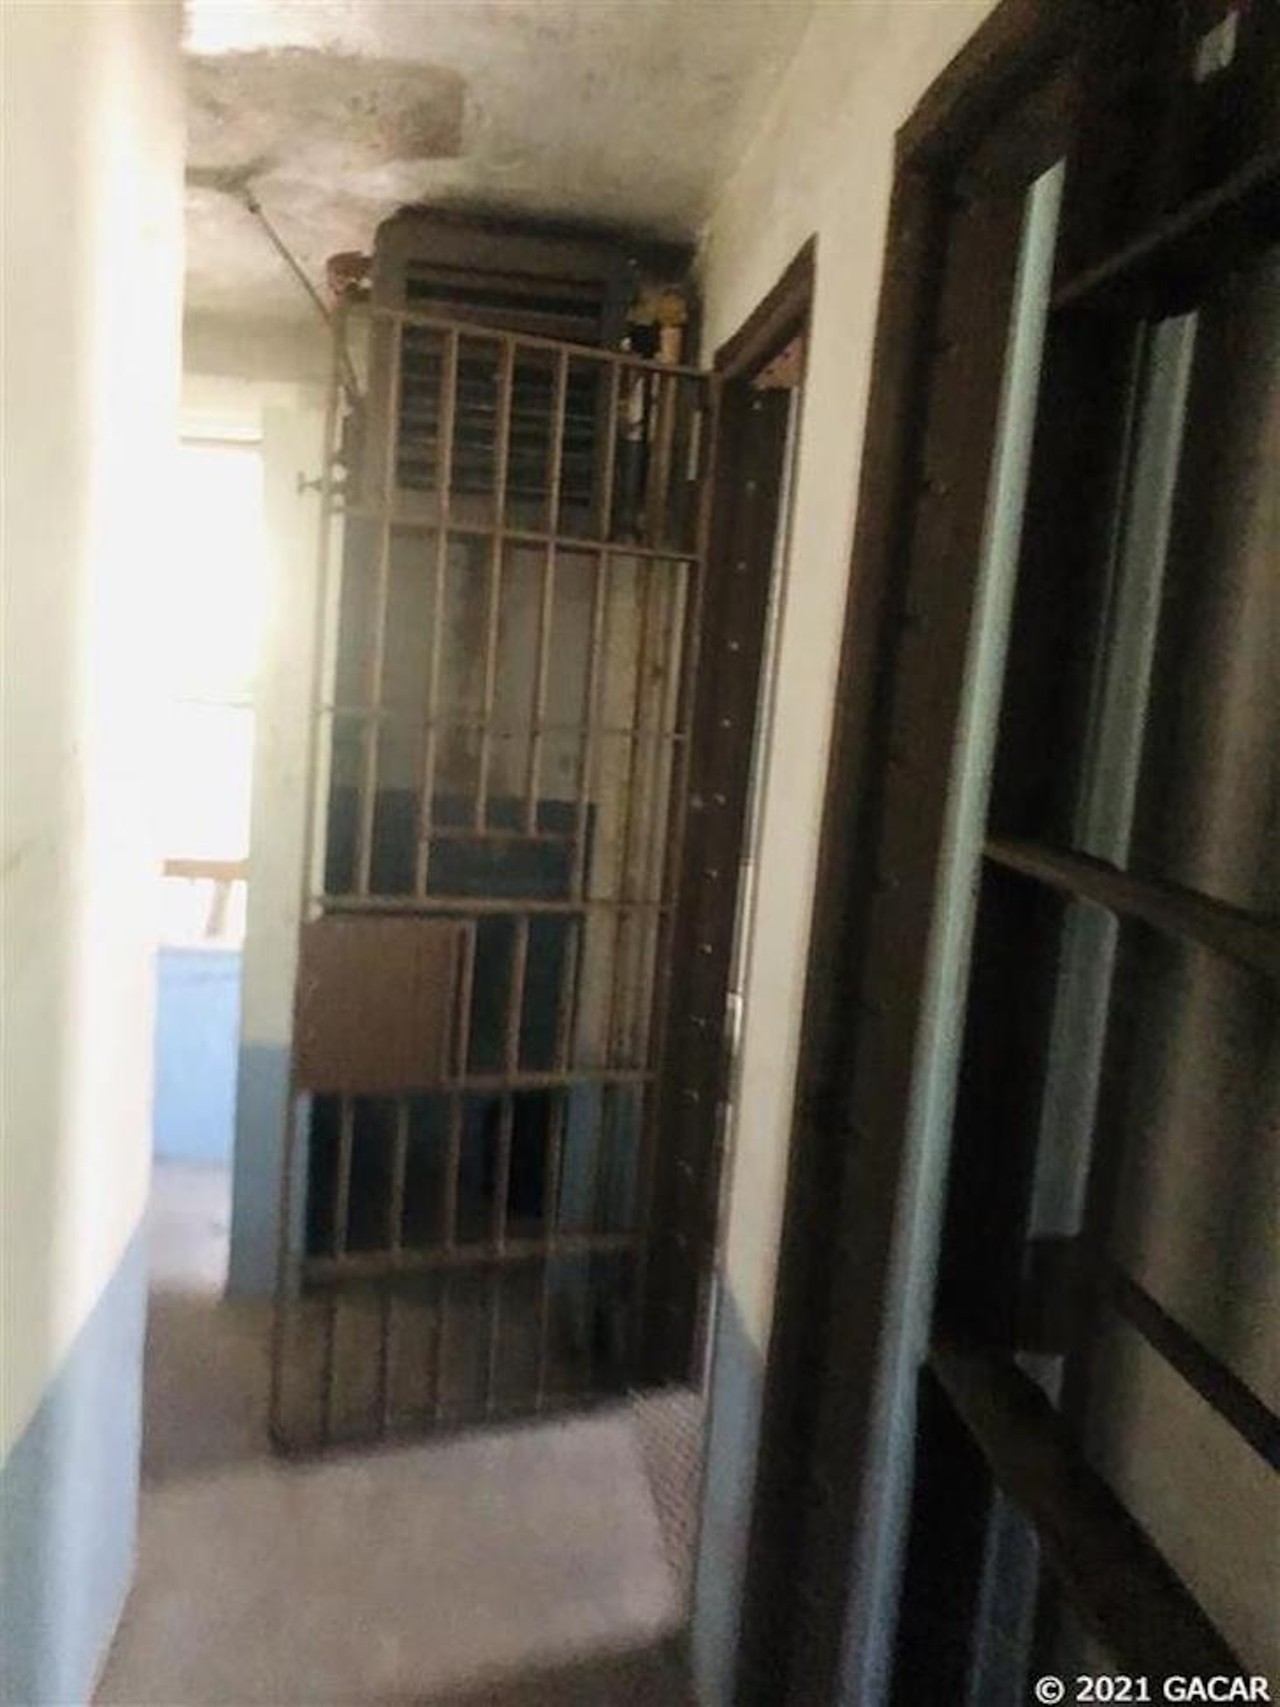 The haunted Gilchrist County Jail is now for sale in Florida for just $139k